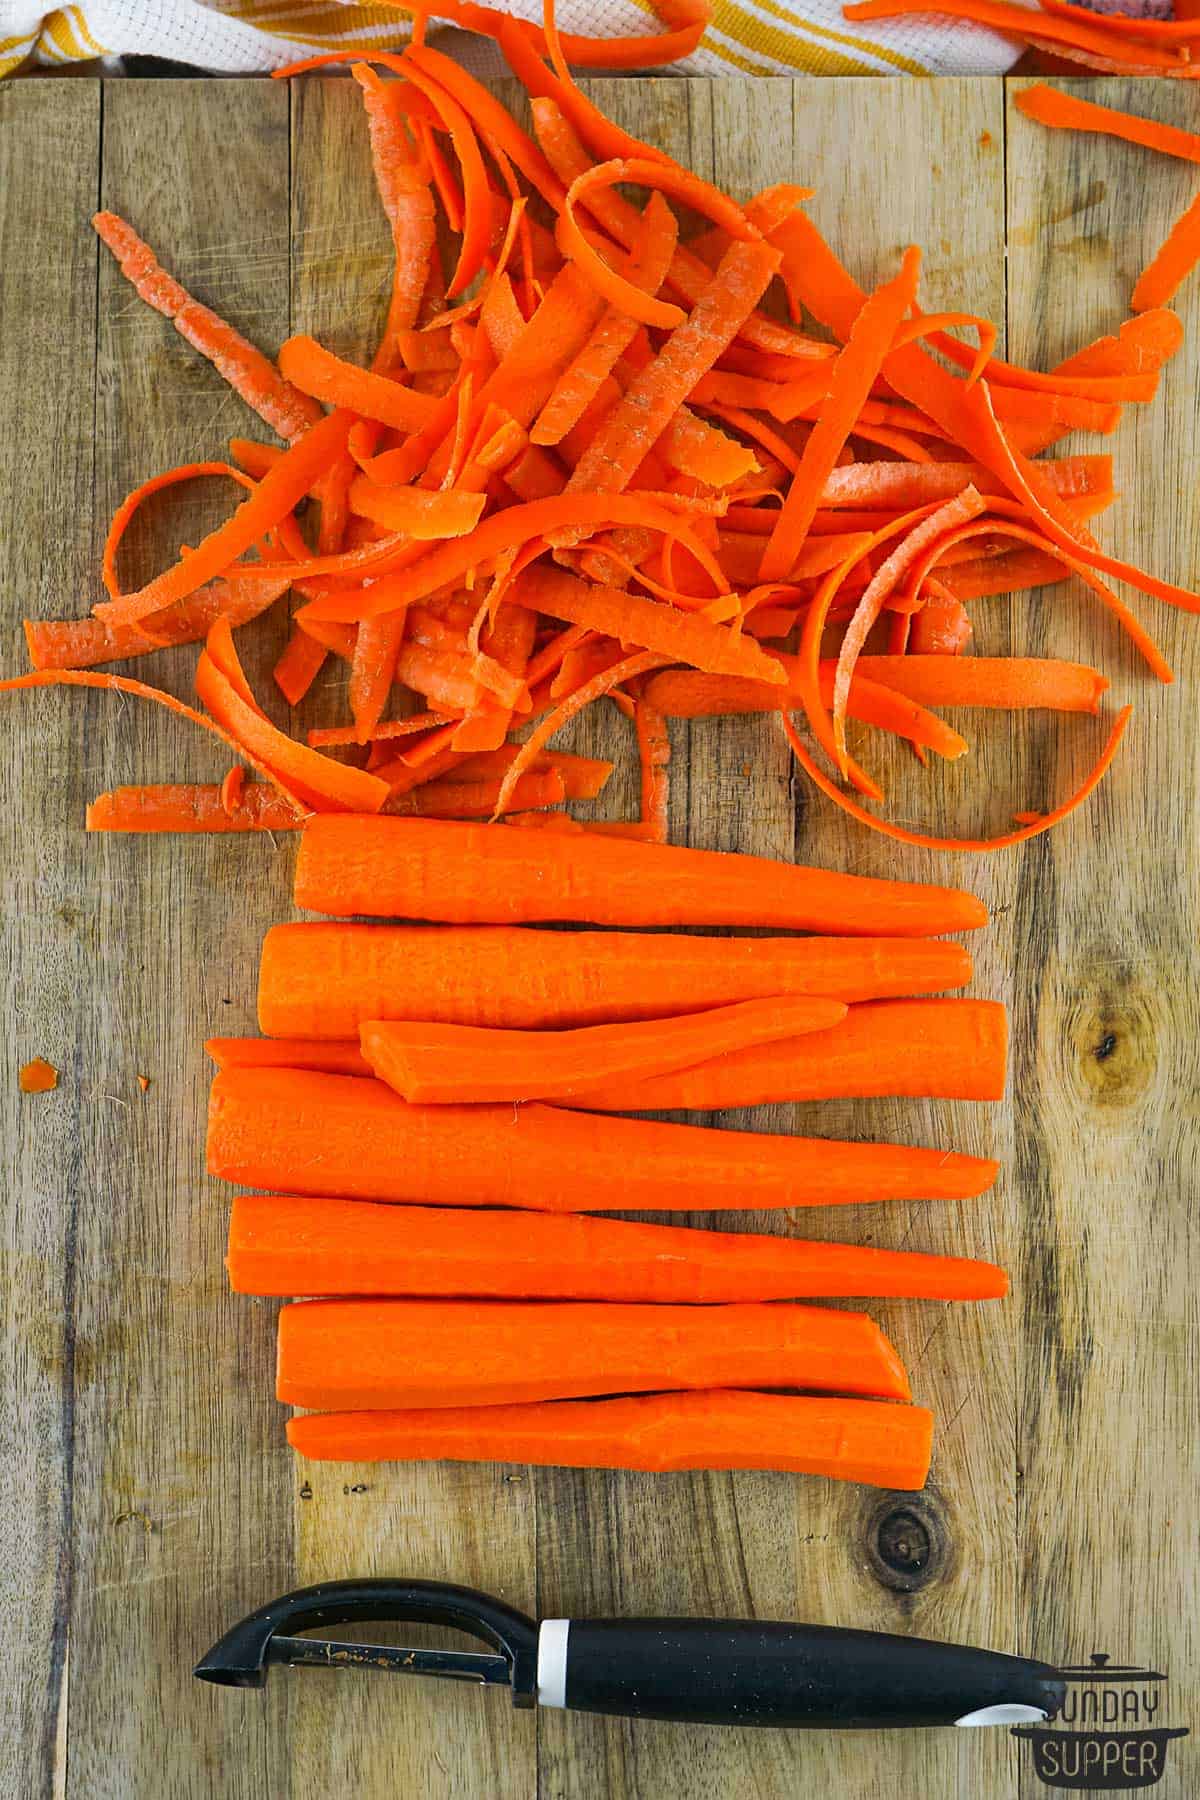 trimmed and peeled carrots on a cutting board